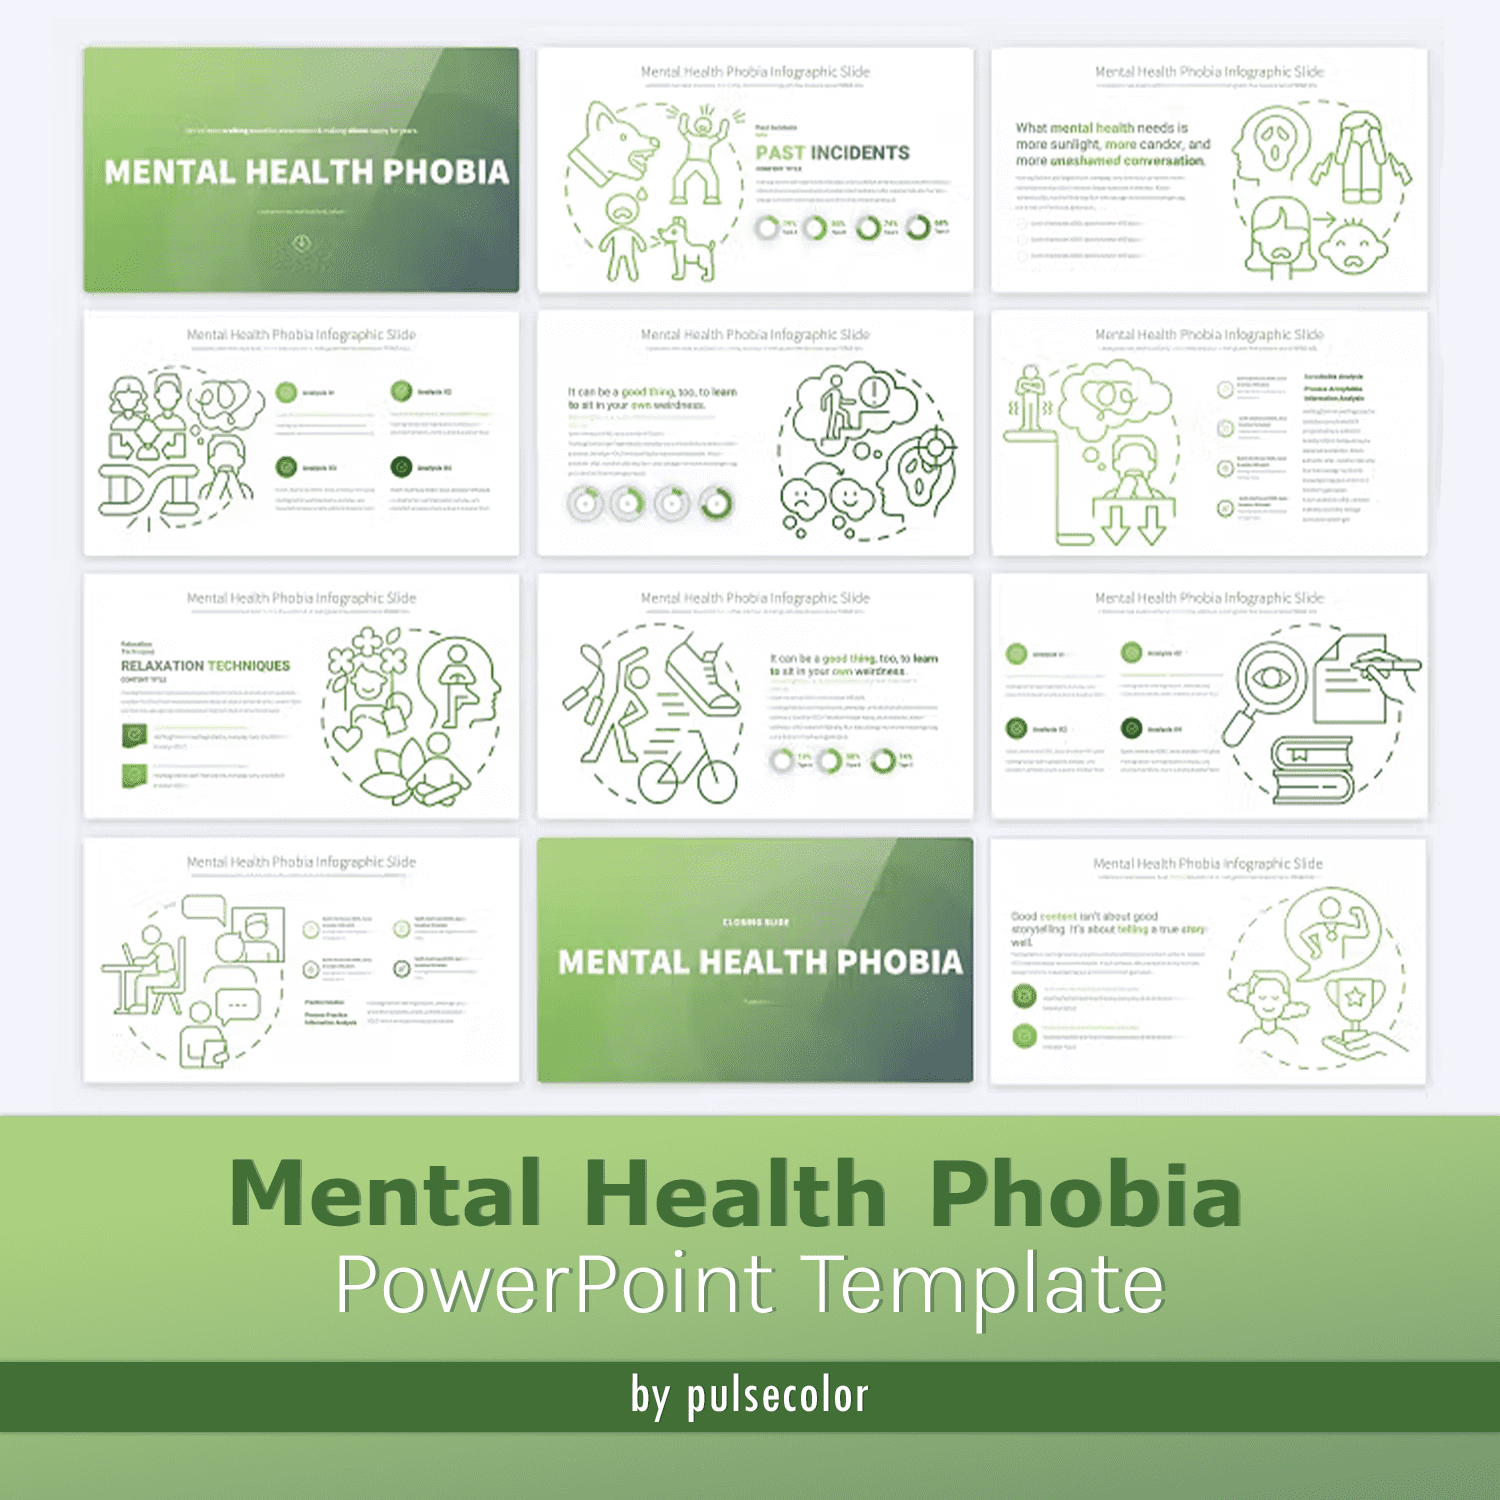 Mental Health Phobia - PowerPoint Template Cover.